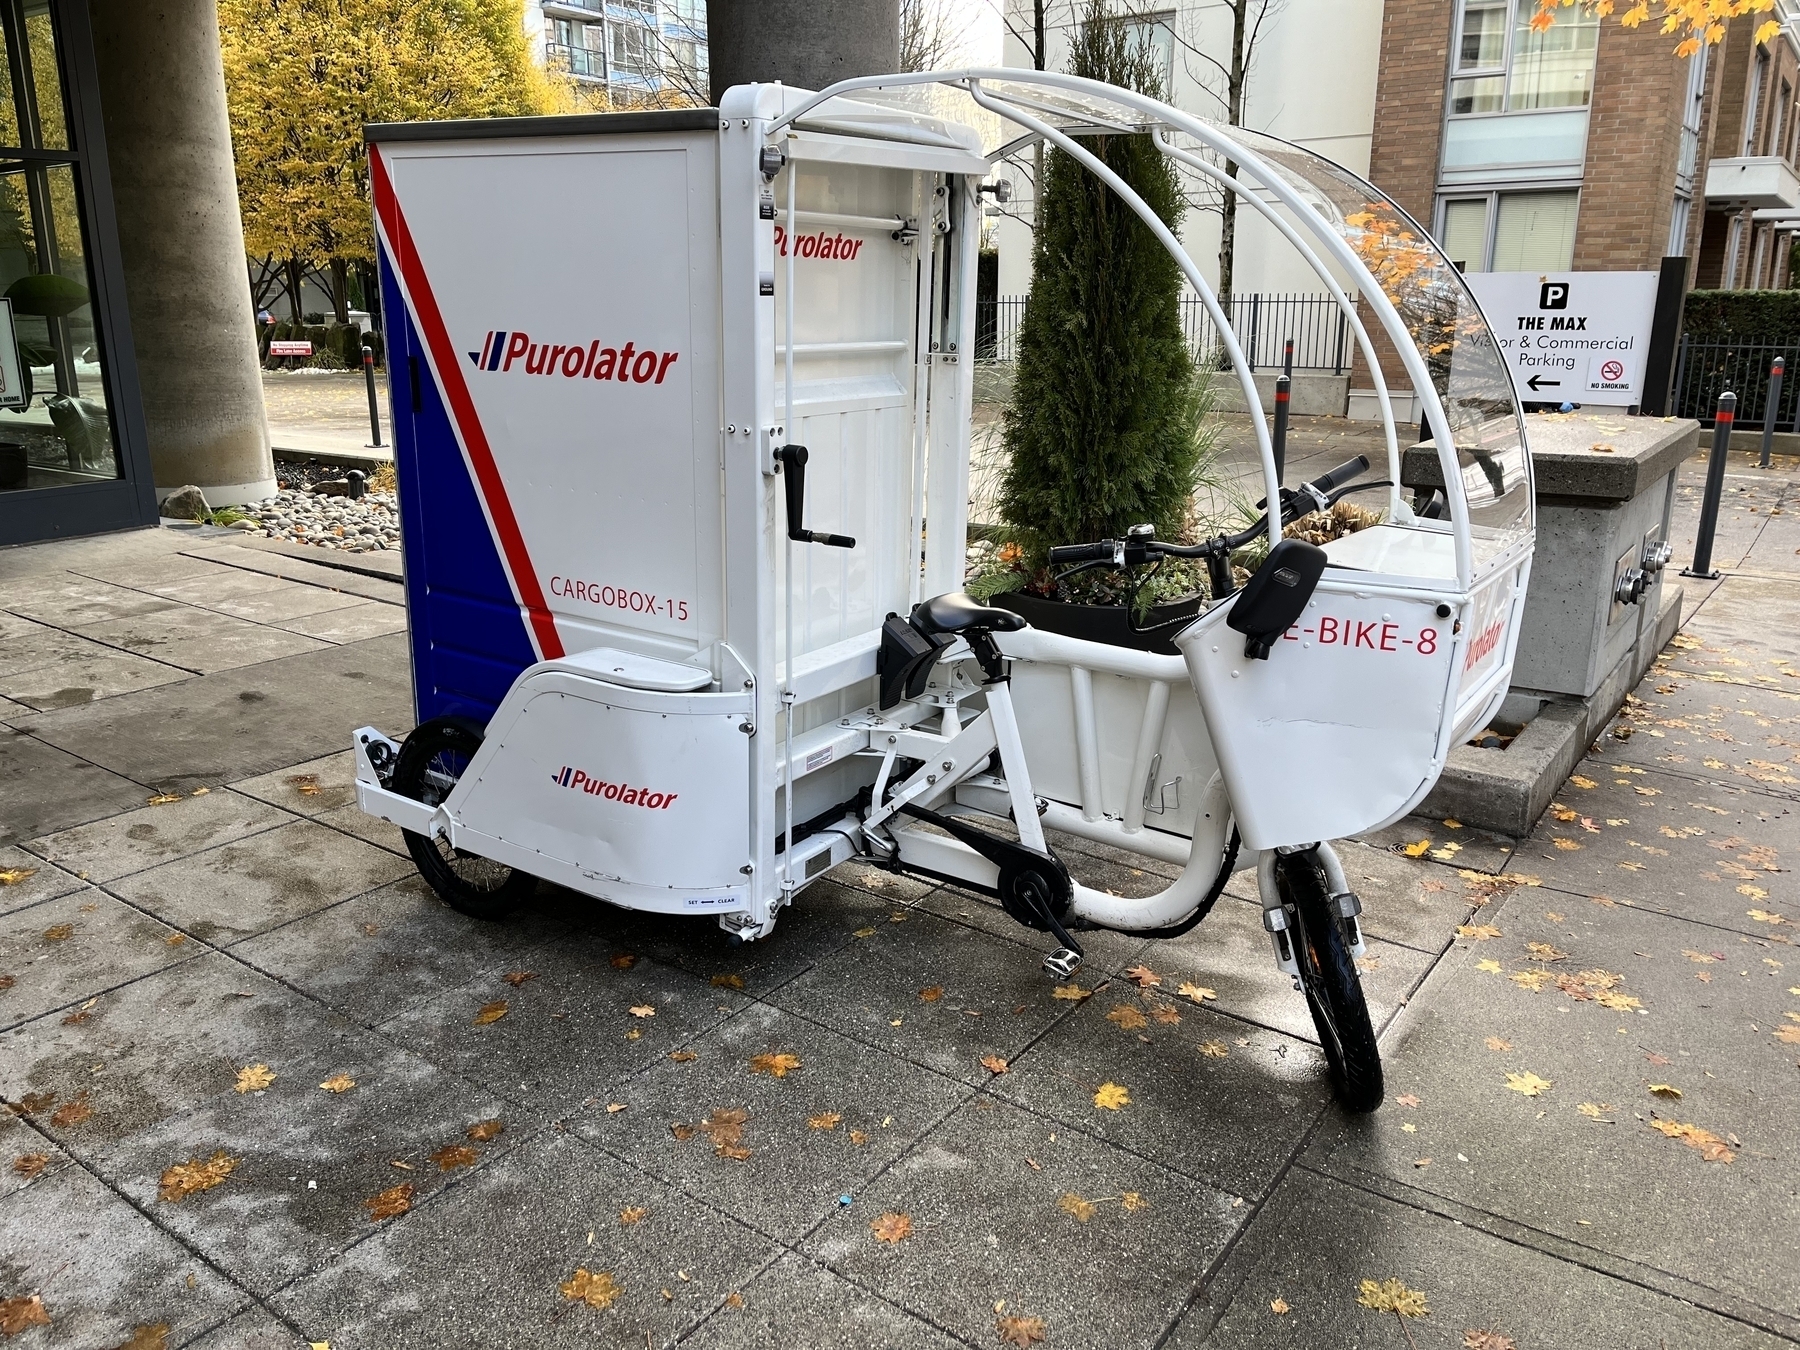 An electric cargo trike with the Purolator logo on it. The bike has a windshield, and a large enclosed rear cargo box that is approximately the size of a refrigerator.